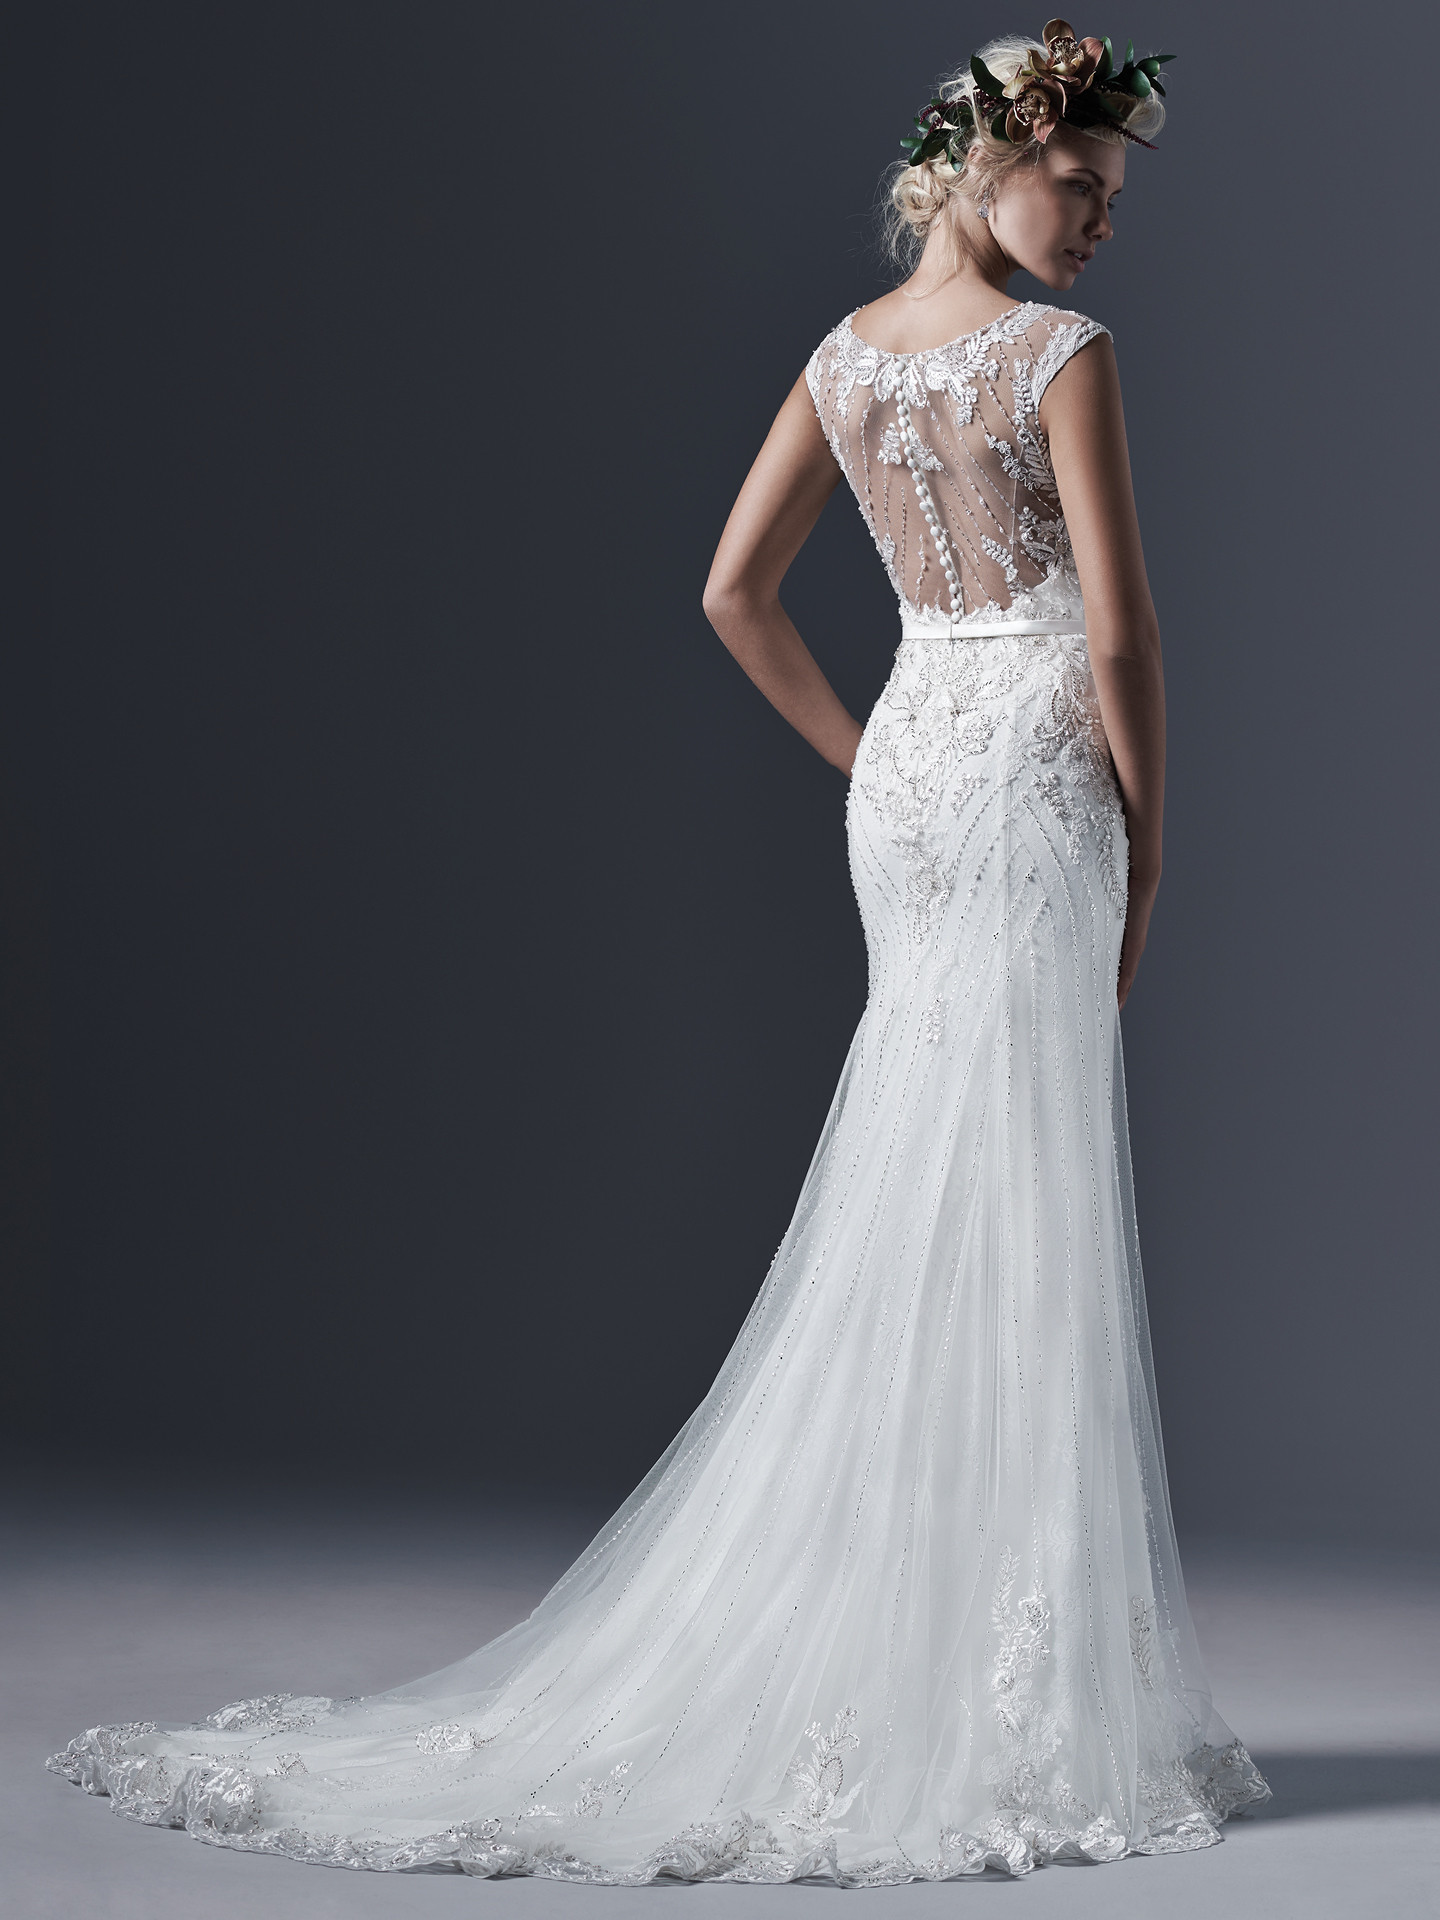 Great Gatsby Wedding Dress
 Great Gatsby Inspired Wedding Dresses To Fall In Love With